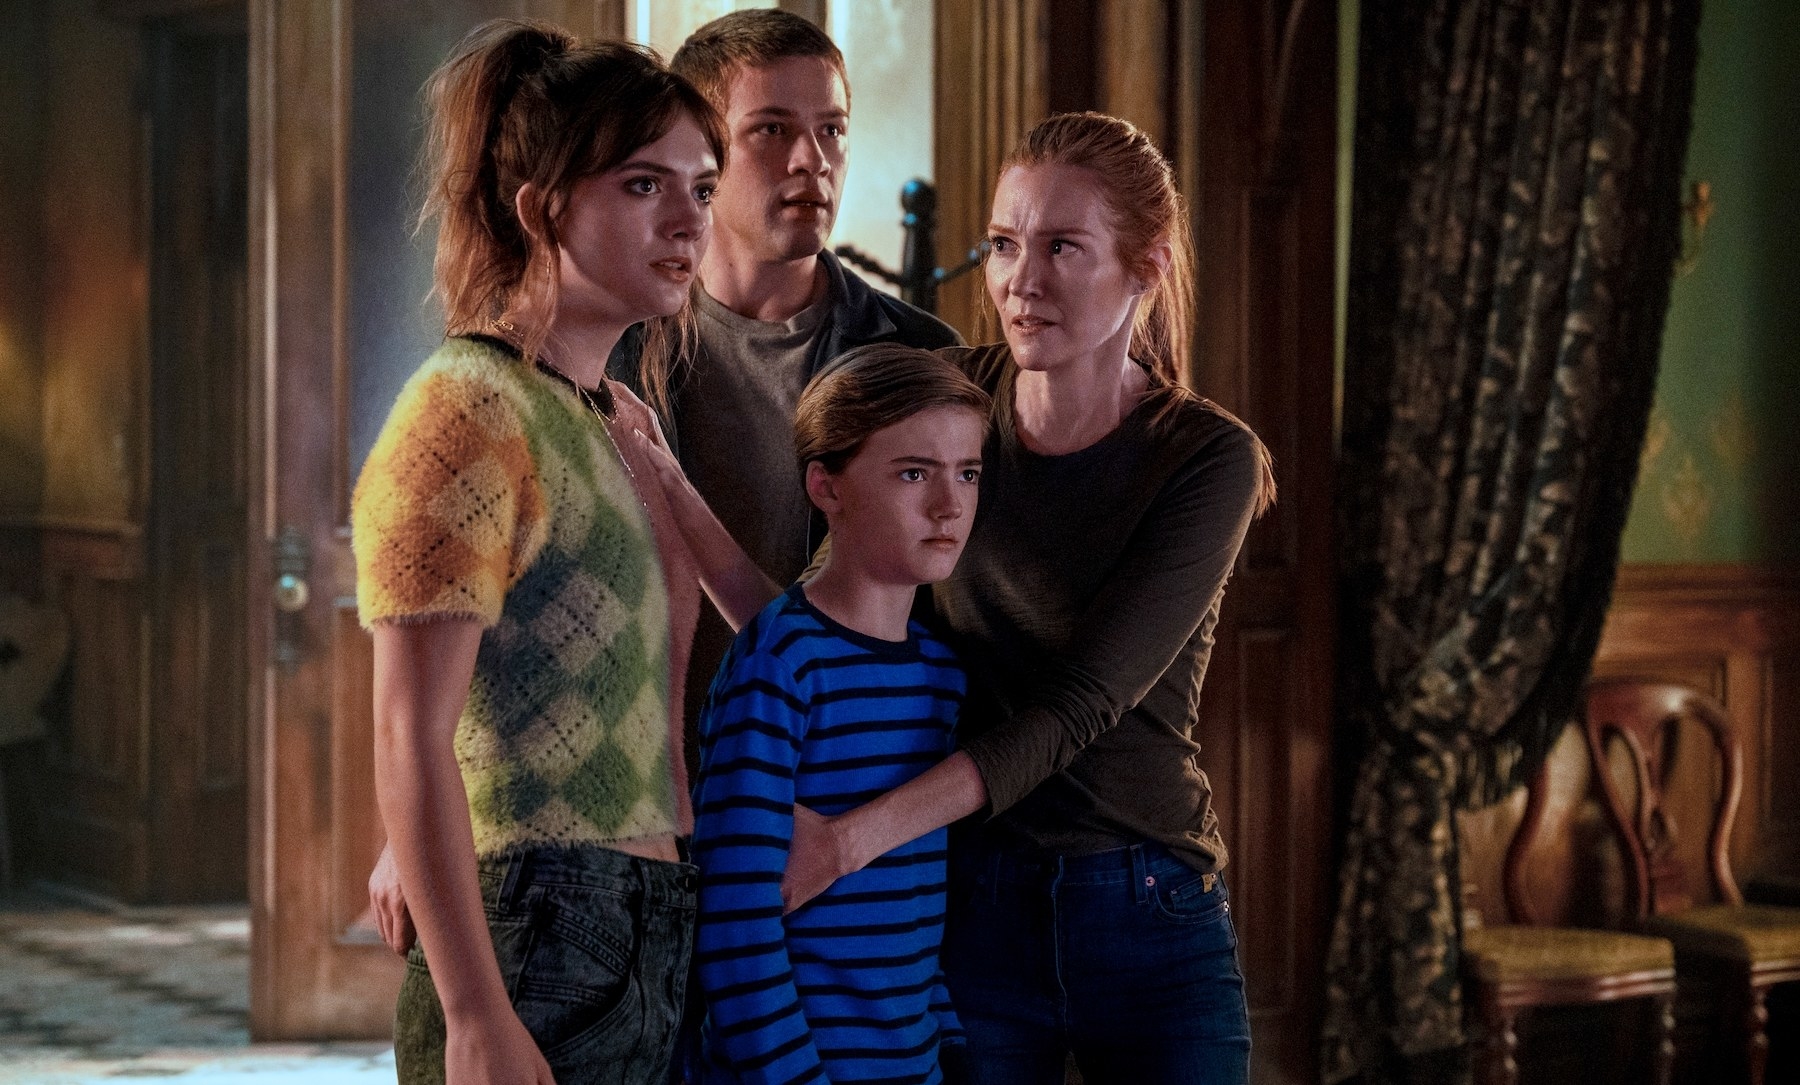 three kids and their mother huddle together looking concerned at something out of frame in the middle of a grand looking house